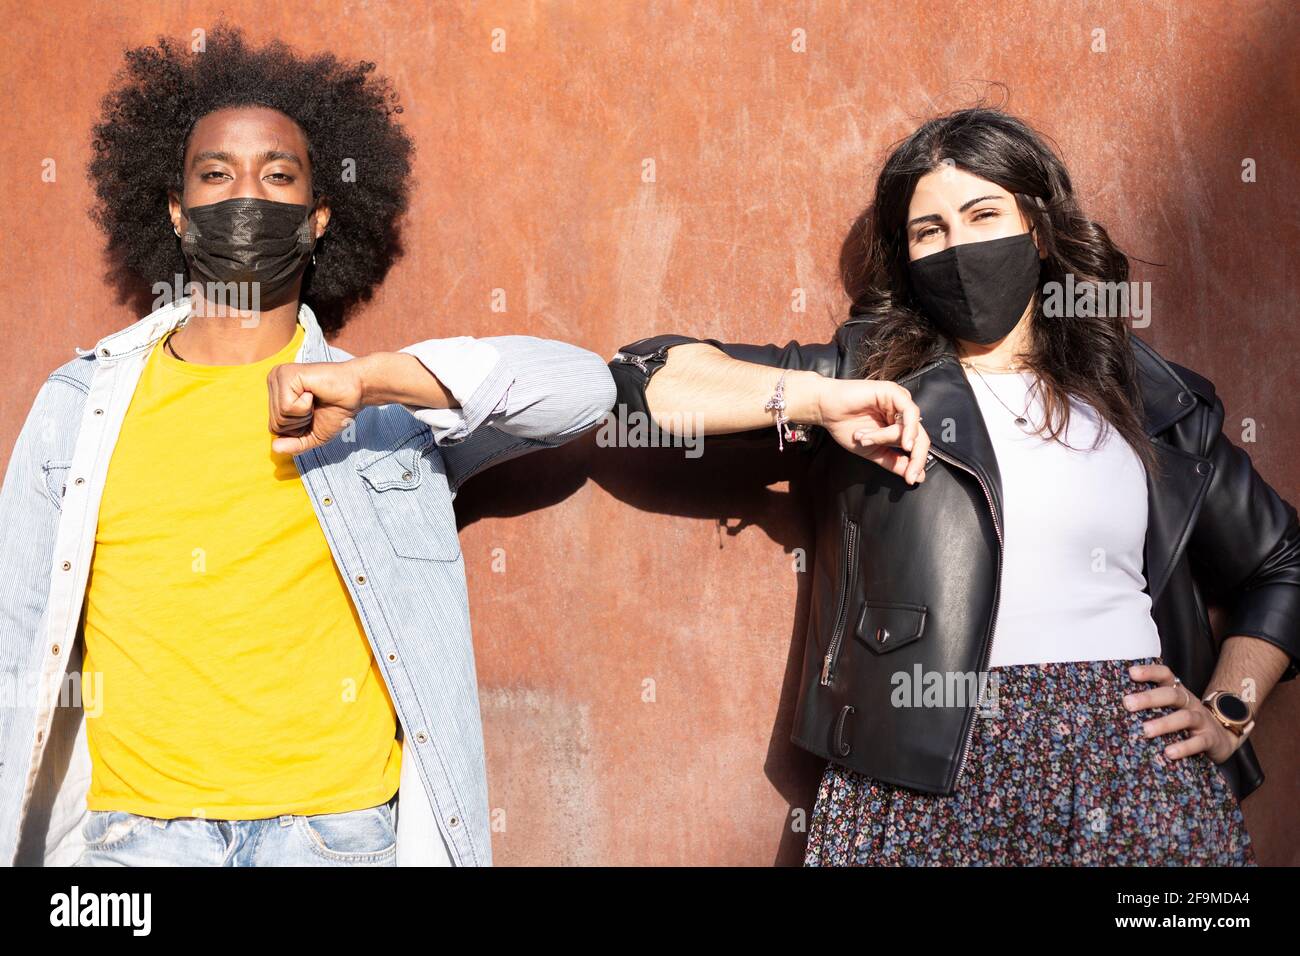 Couple of multiethnic friends wearing protective masks greet each other by bumping elbows and keeping the recommended distance to avoid Covid-19 virus Stock Photo